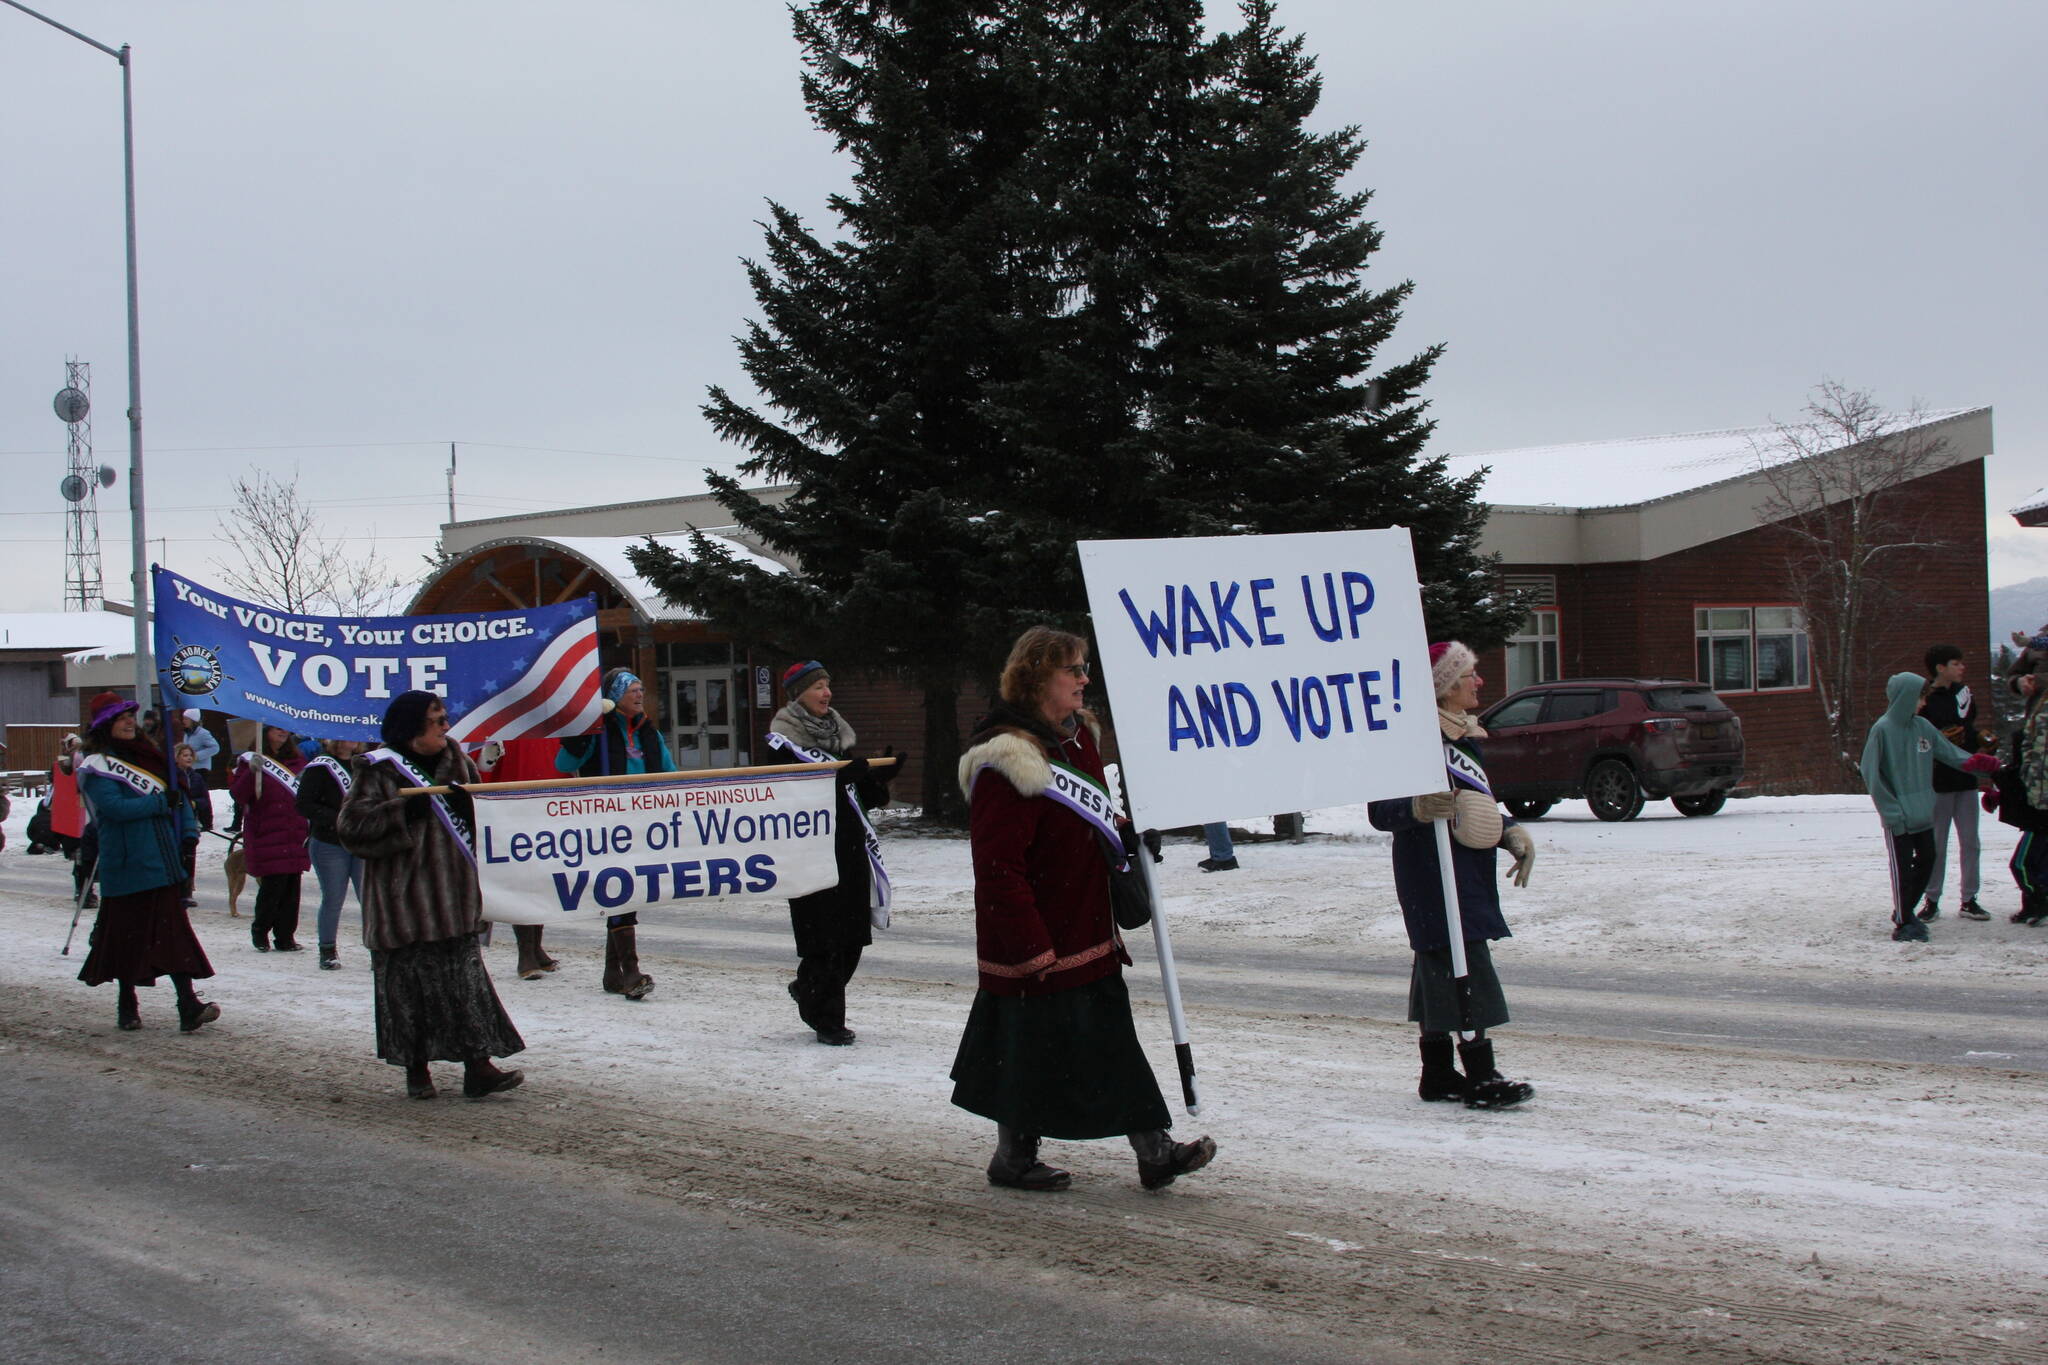 The Central Kenai Peninsula League of Women Voters march down Pioneer Avenue in the 69th annual Winter Carnival Parade on Saturday, Feb. 11, 2023 in Homer, Alaska. Photo by Delcenia Cosman